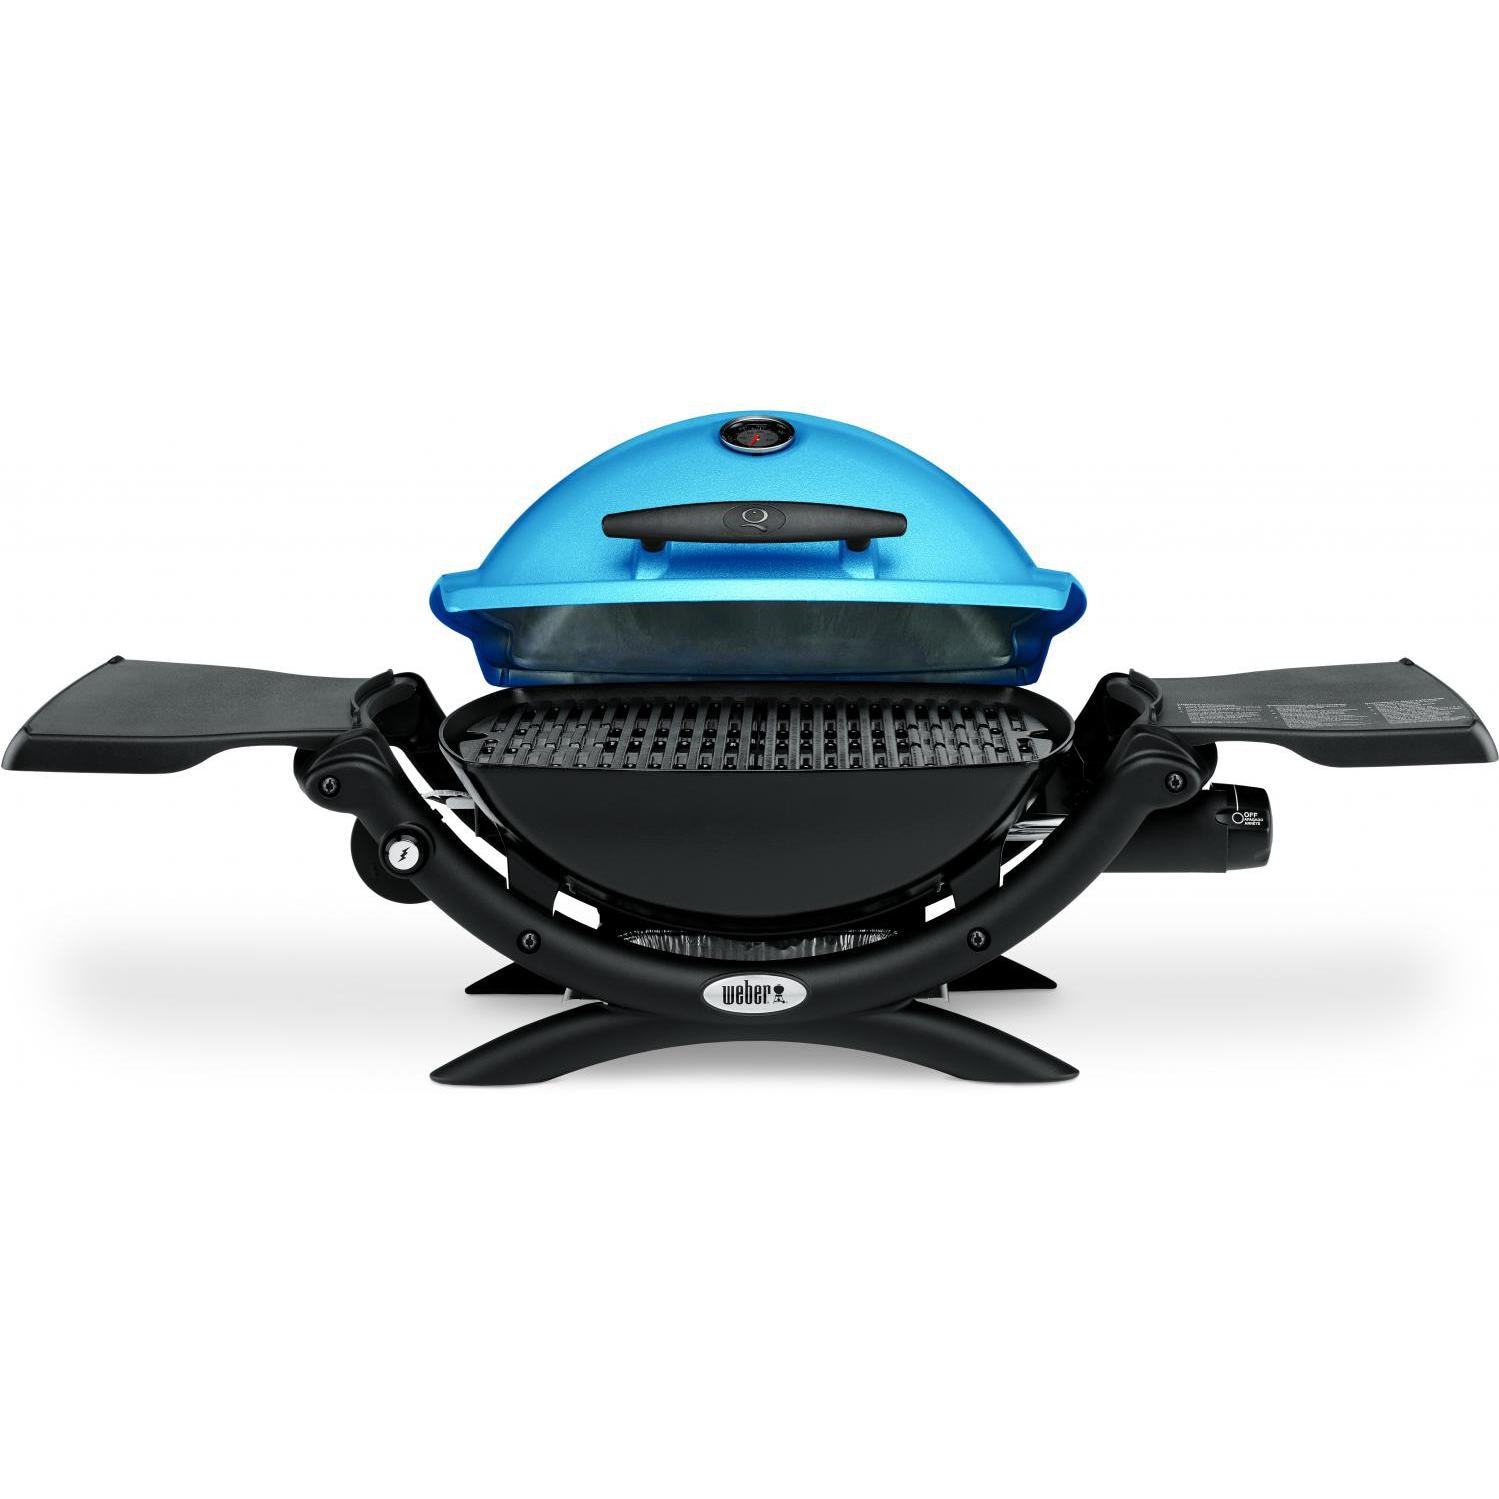 GRILL PORTABLE GAS Q 1200 BLUE - image 3 of 6